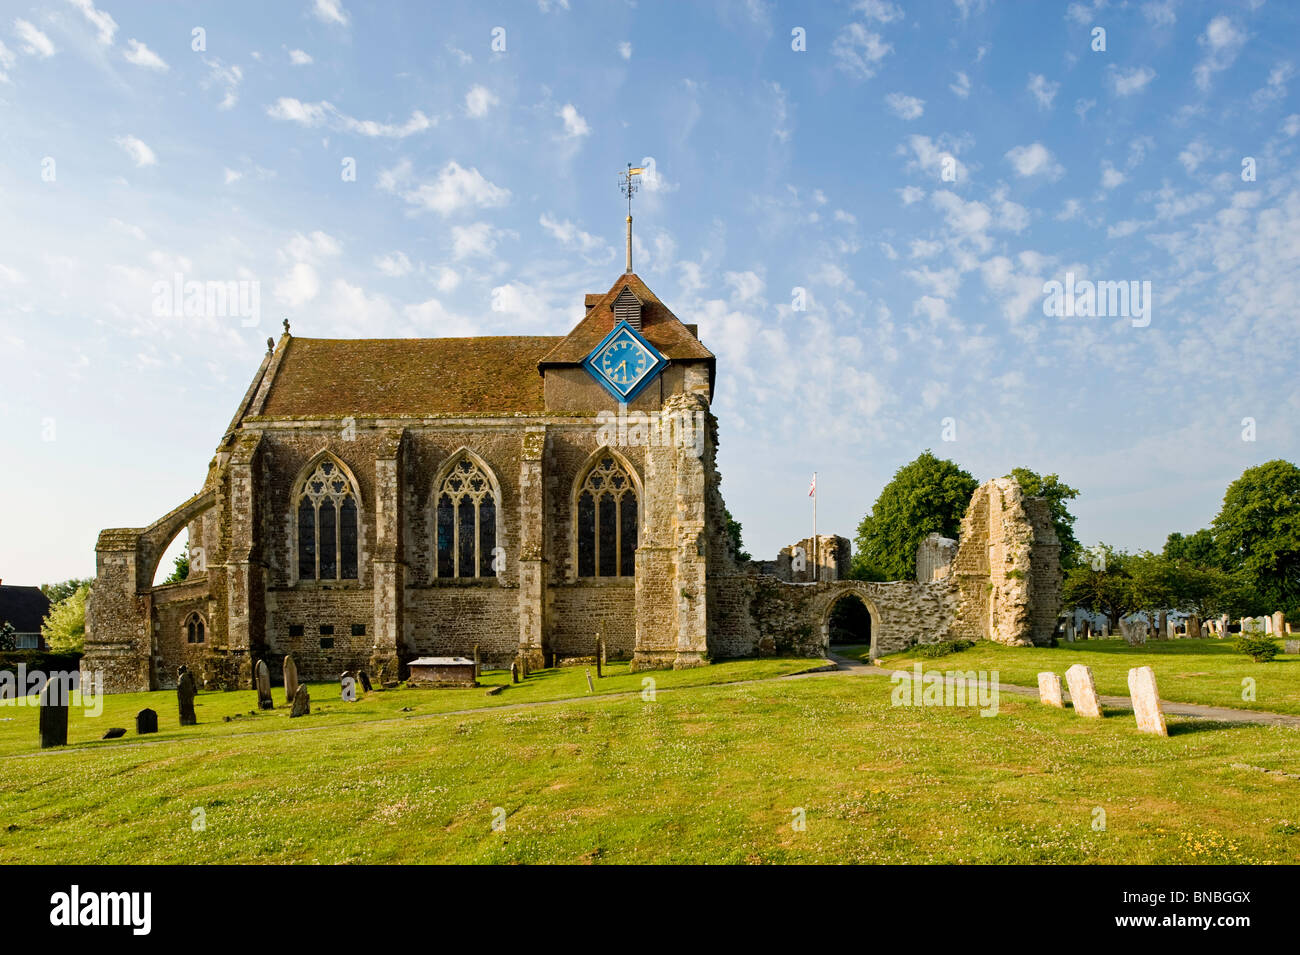 Ancient town of Winchelsea, East Sussex, United Kingdom Stock Photo